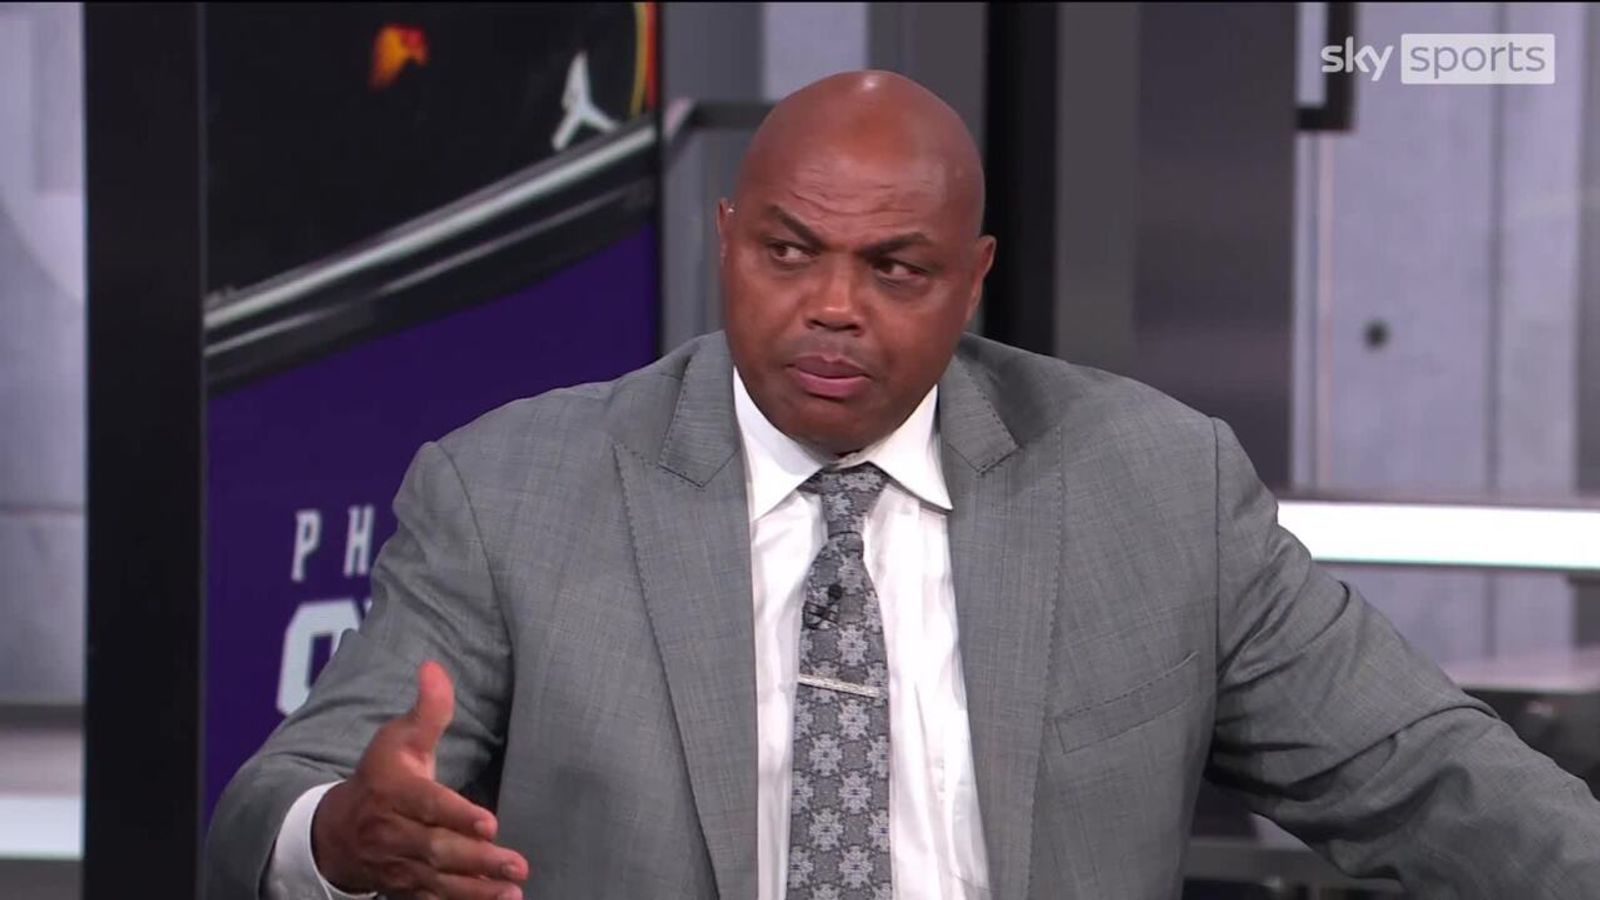 charles-barkley-klay-thompson-and-draymond-green-are-slipping-warriors-must-rely-on-young-guys